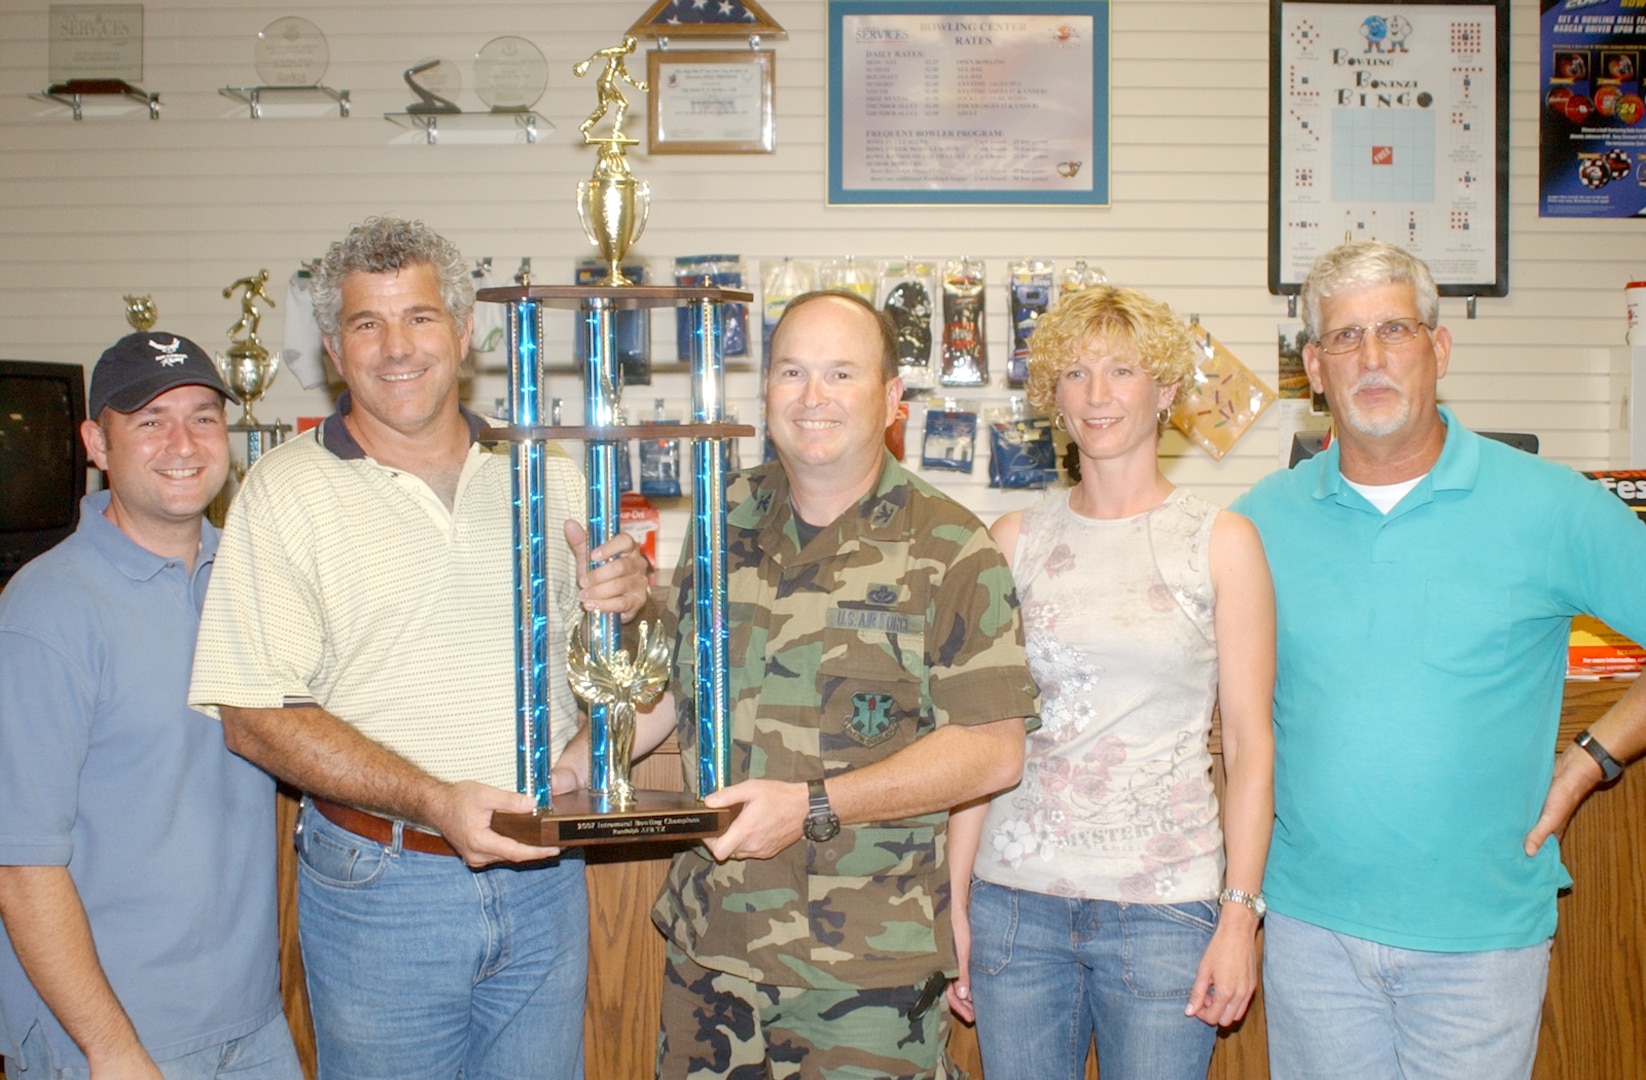 Col. James Sohan (center), 12th Mission Support Group commander, presents the first-place trophy for the Randolph Intramural Bowling League to the 12th MSG team represented by Doc Bolduc (left), Chris Goelz, Michelle Wiesmann and Kirk Mason. (U.S. Air Force photo by Robert Goetz)